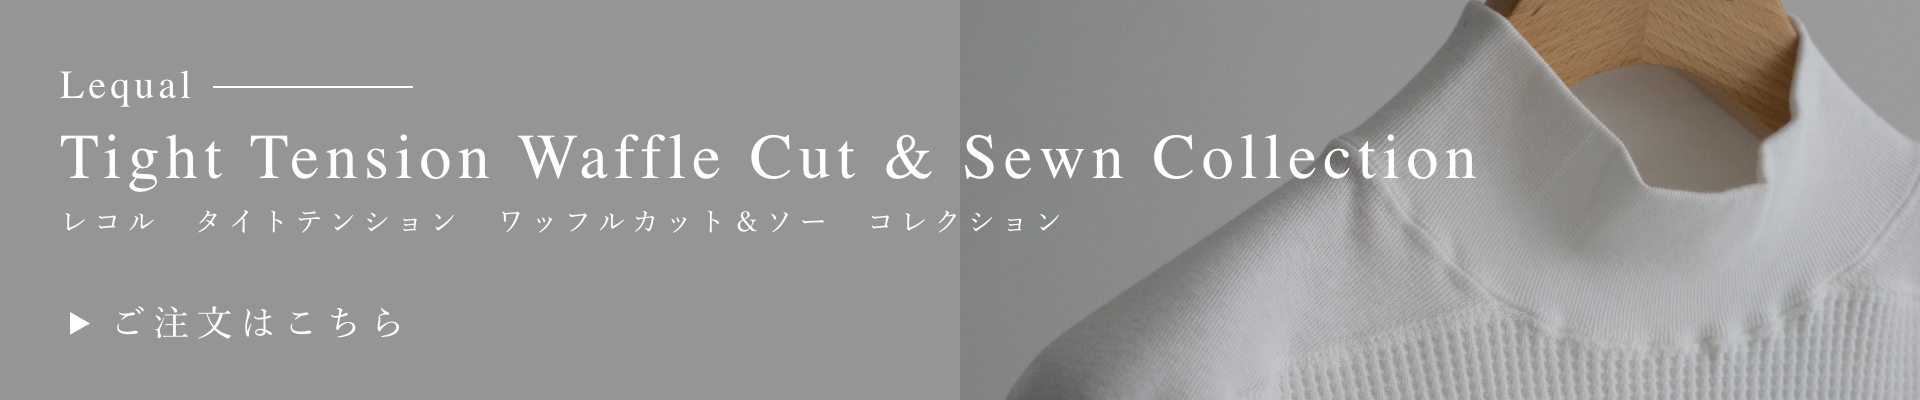 Tight Tension Waffle Cut & Sewn Collection Banner